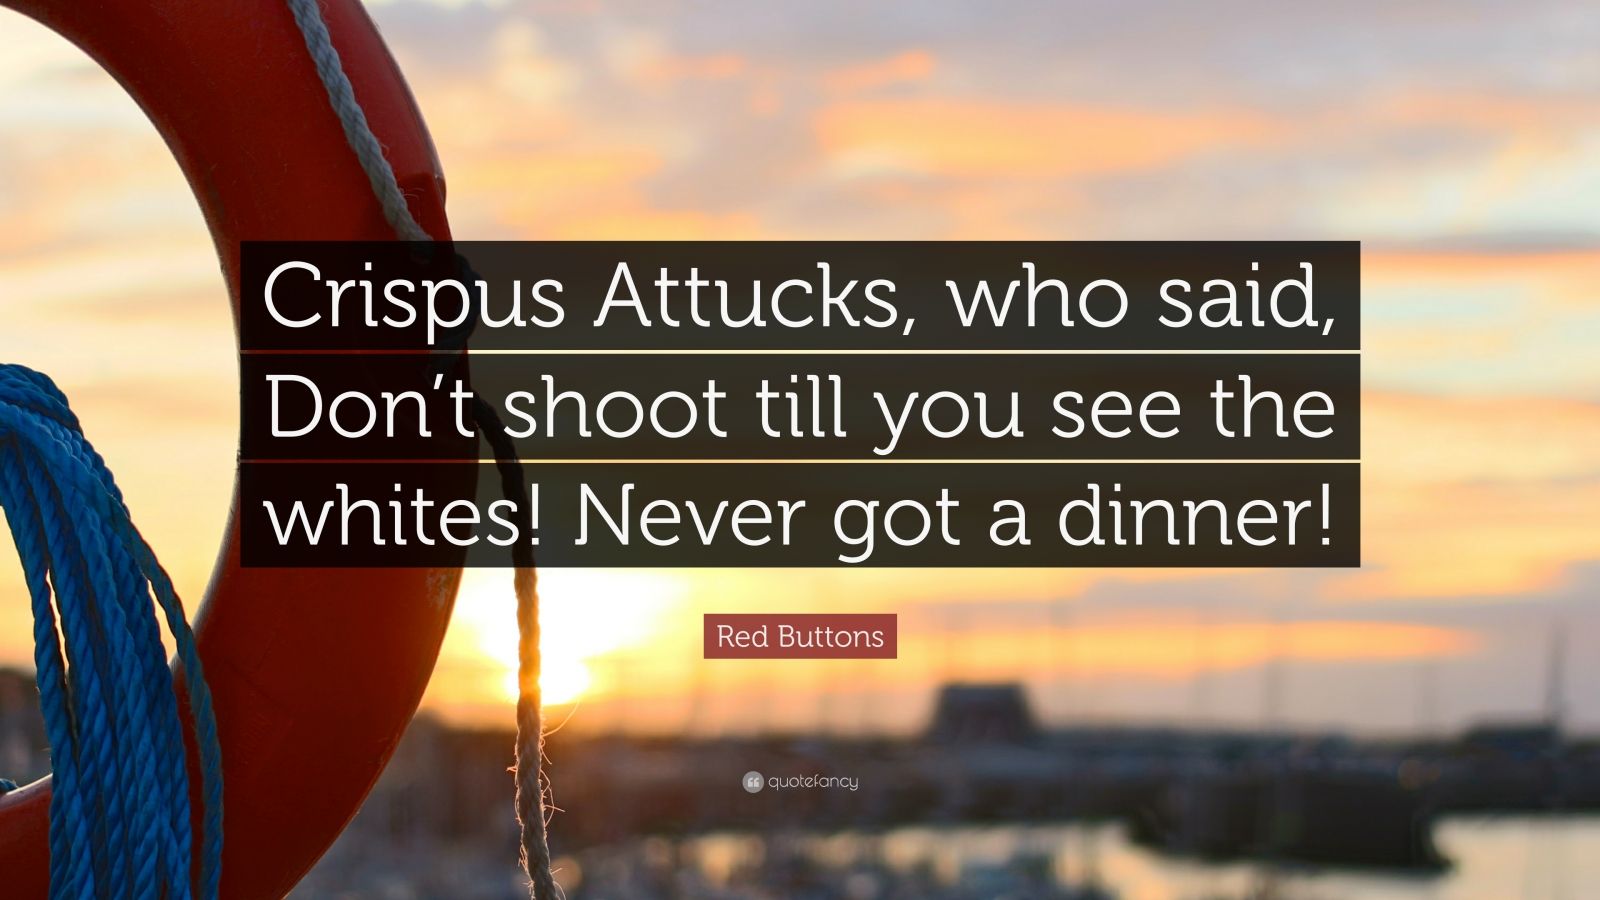 Red Buttons Quote: “Crispus Attucks, who said, Don’t shoot till you see